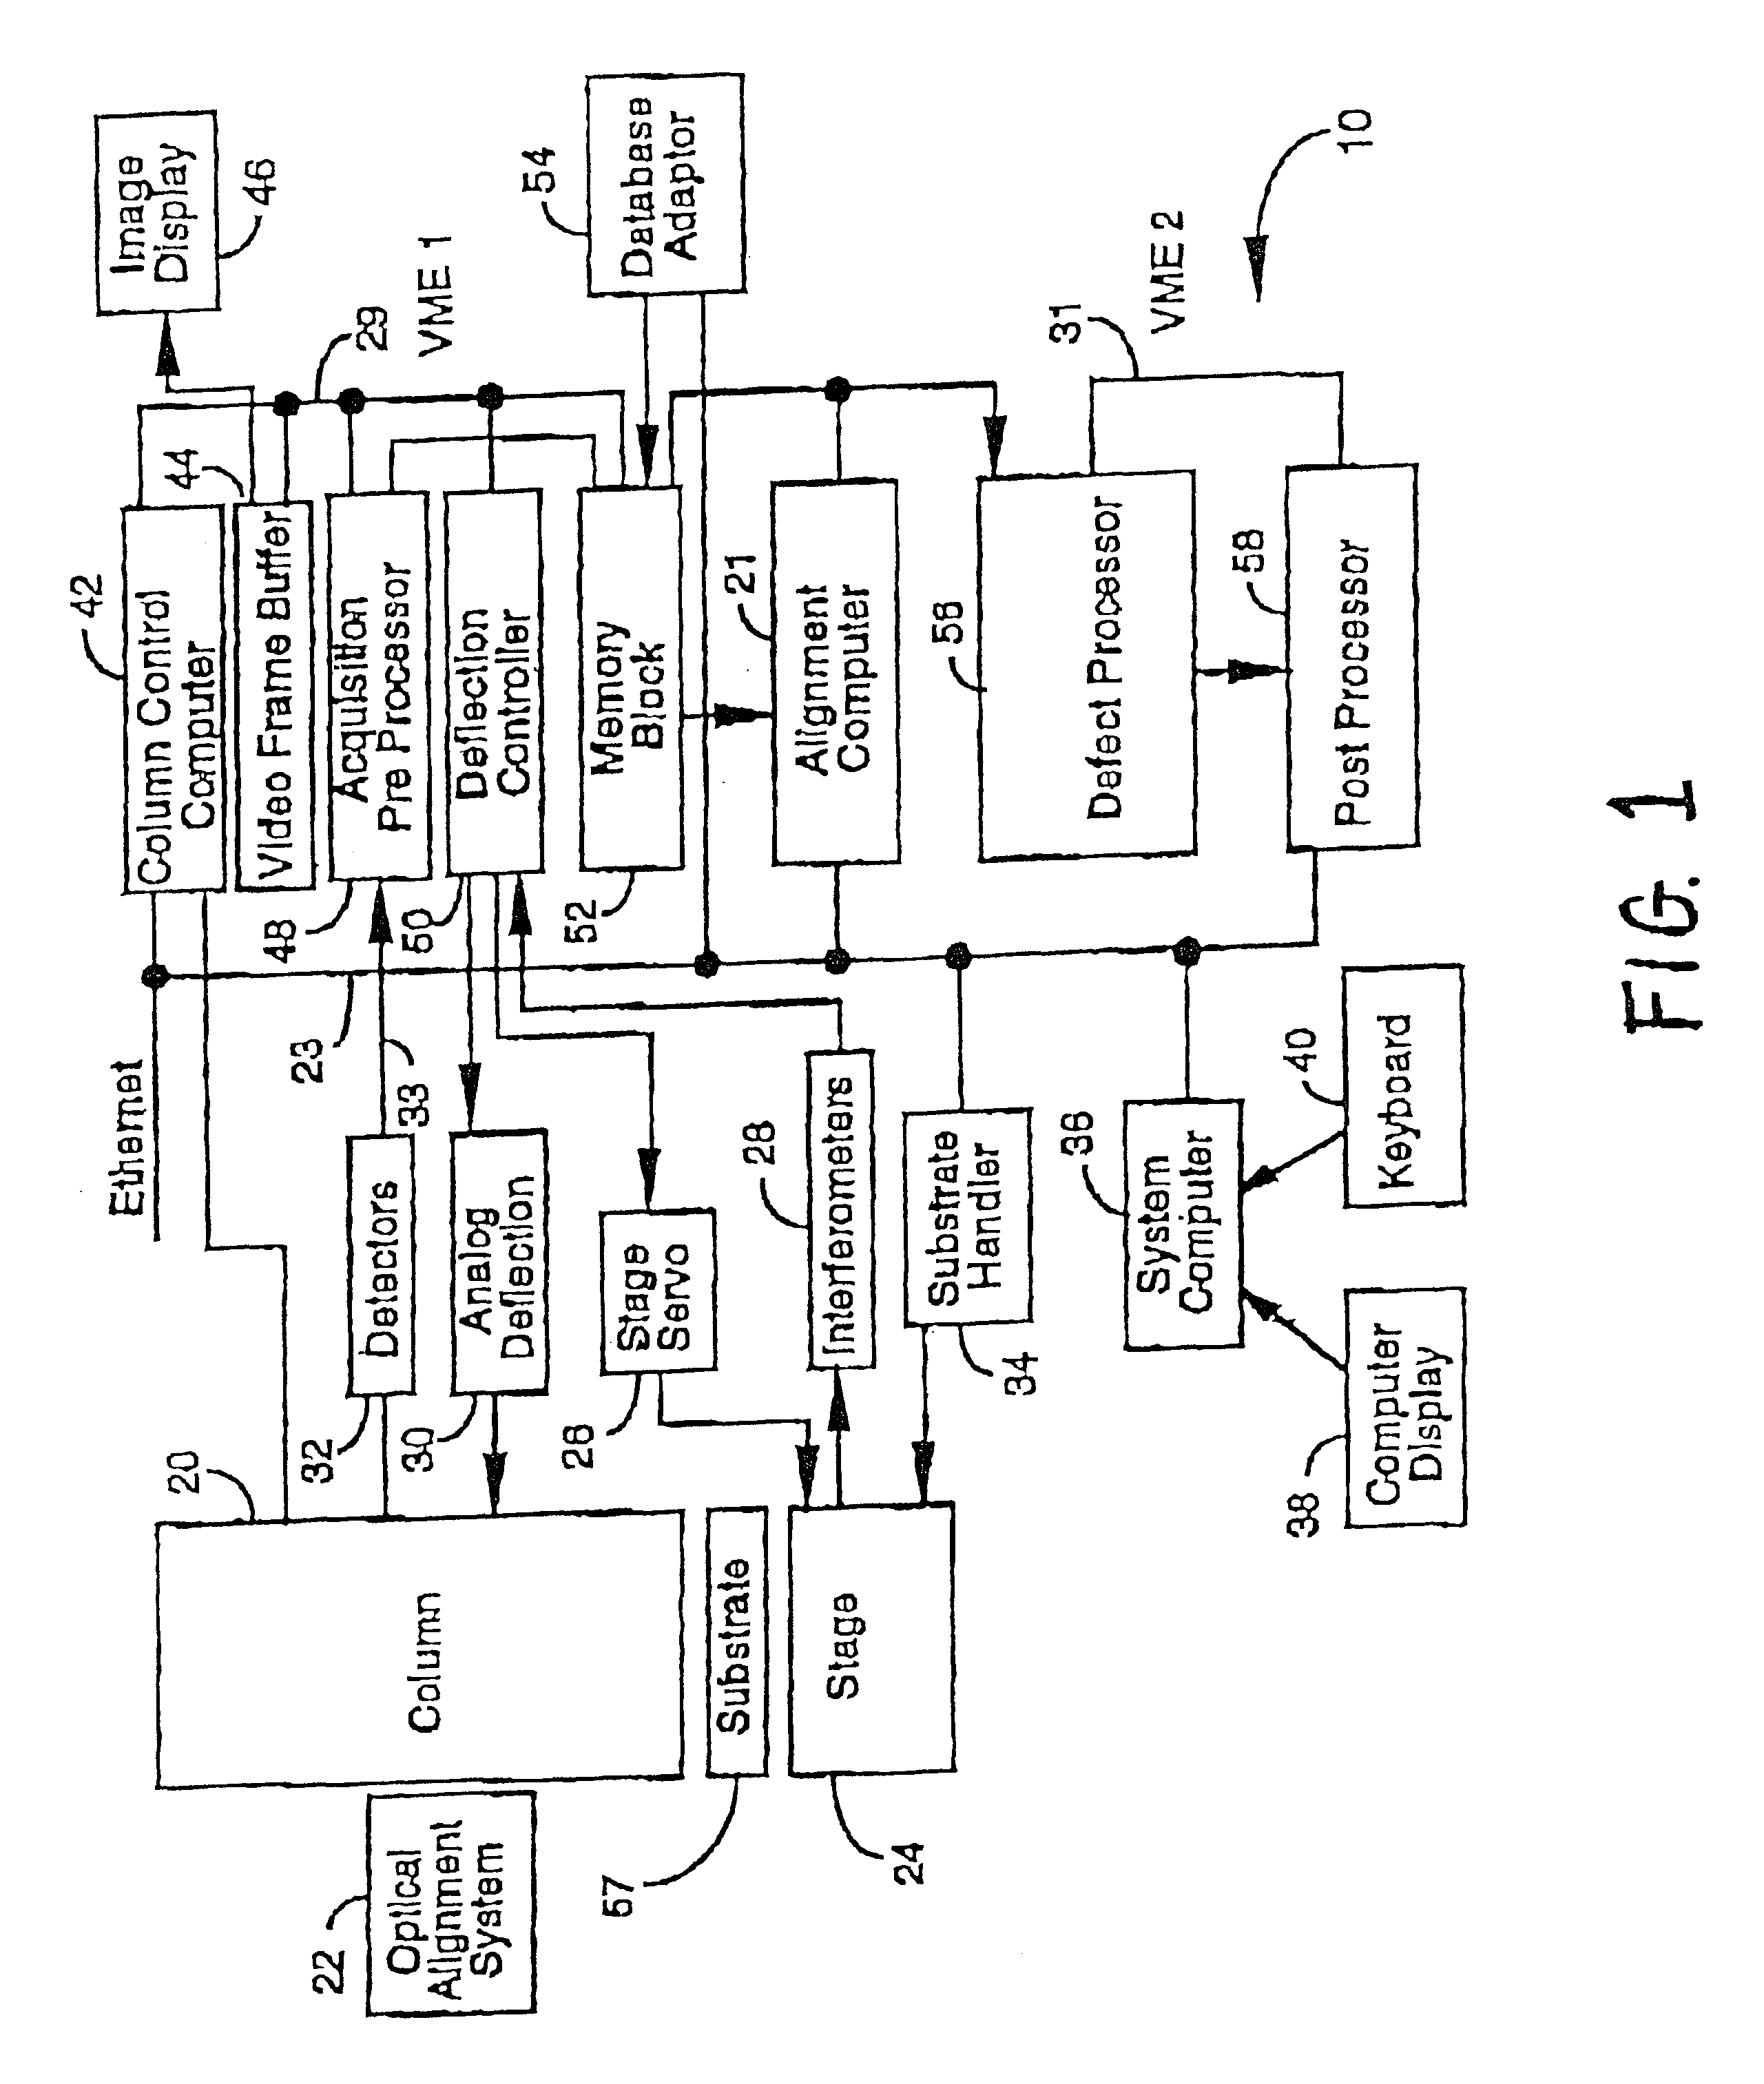 Methods and apparatus for generating spatially resolved voltage contrast maps of semiconductor test structures